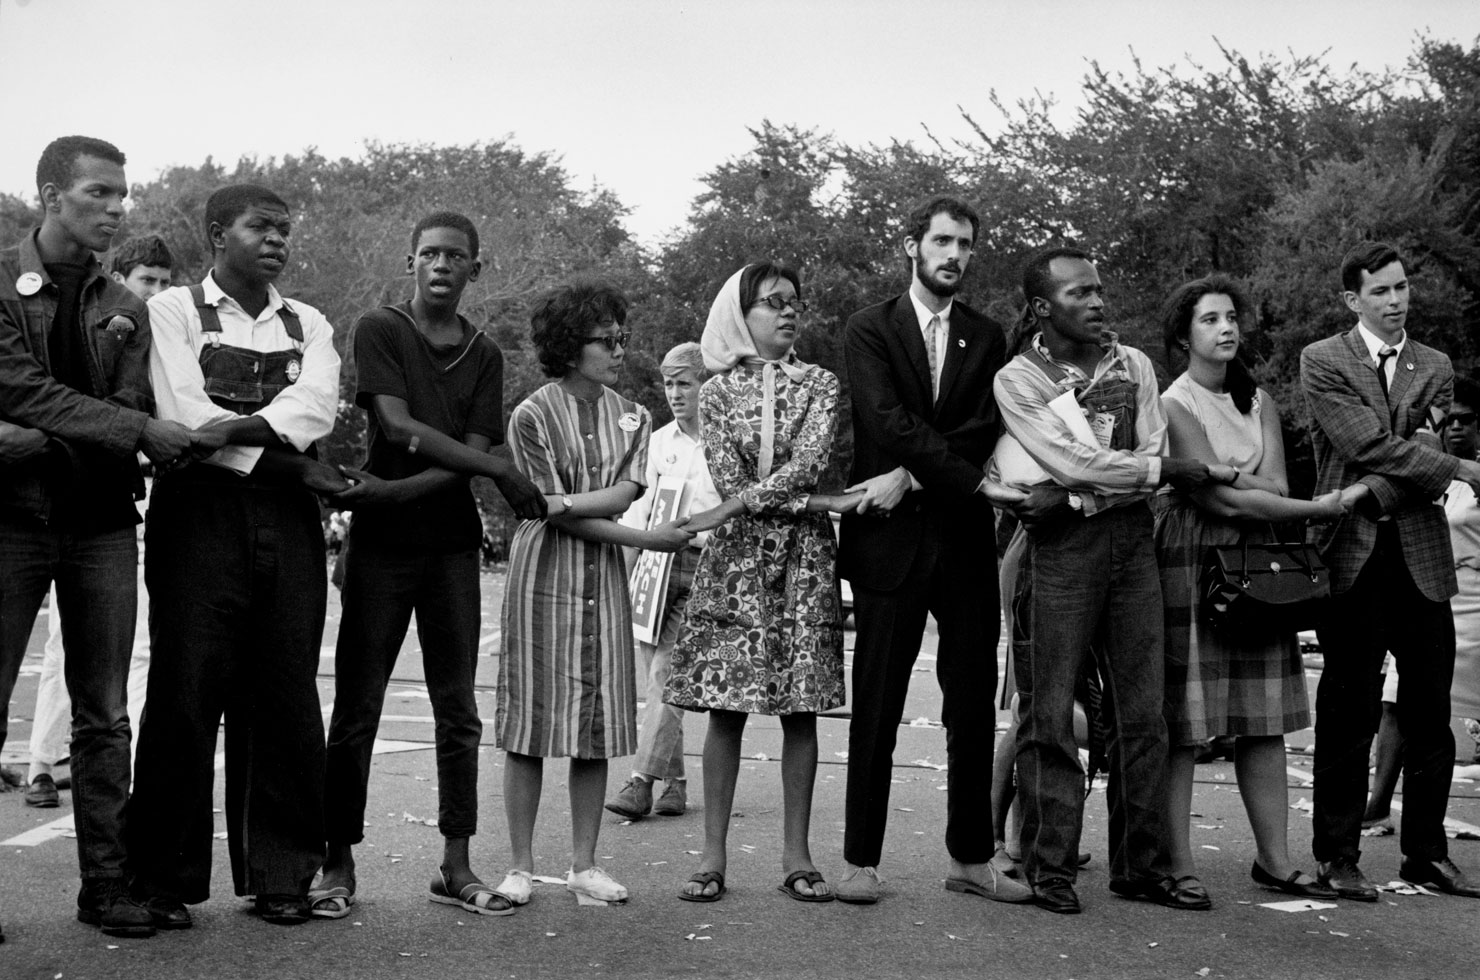 "[Freed] allows the images to steep in the crucible of American race. One can almost catch the subliminal suggestion: This is what it should always be like. The photograph of blacks and whites linking arms in the culminating rendition of "We Shall Overcome" is sweet 'I sing' in the cake of unity." Michael Eric Dyson.